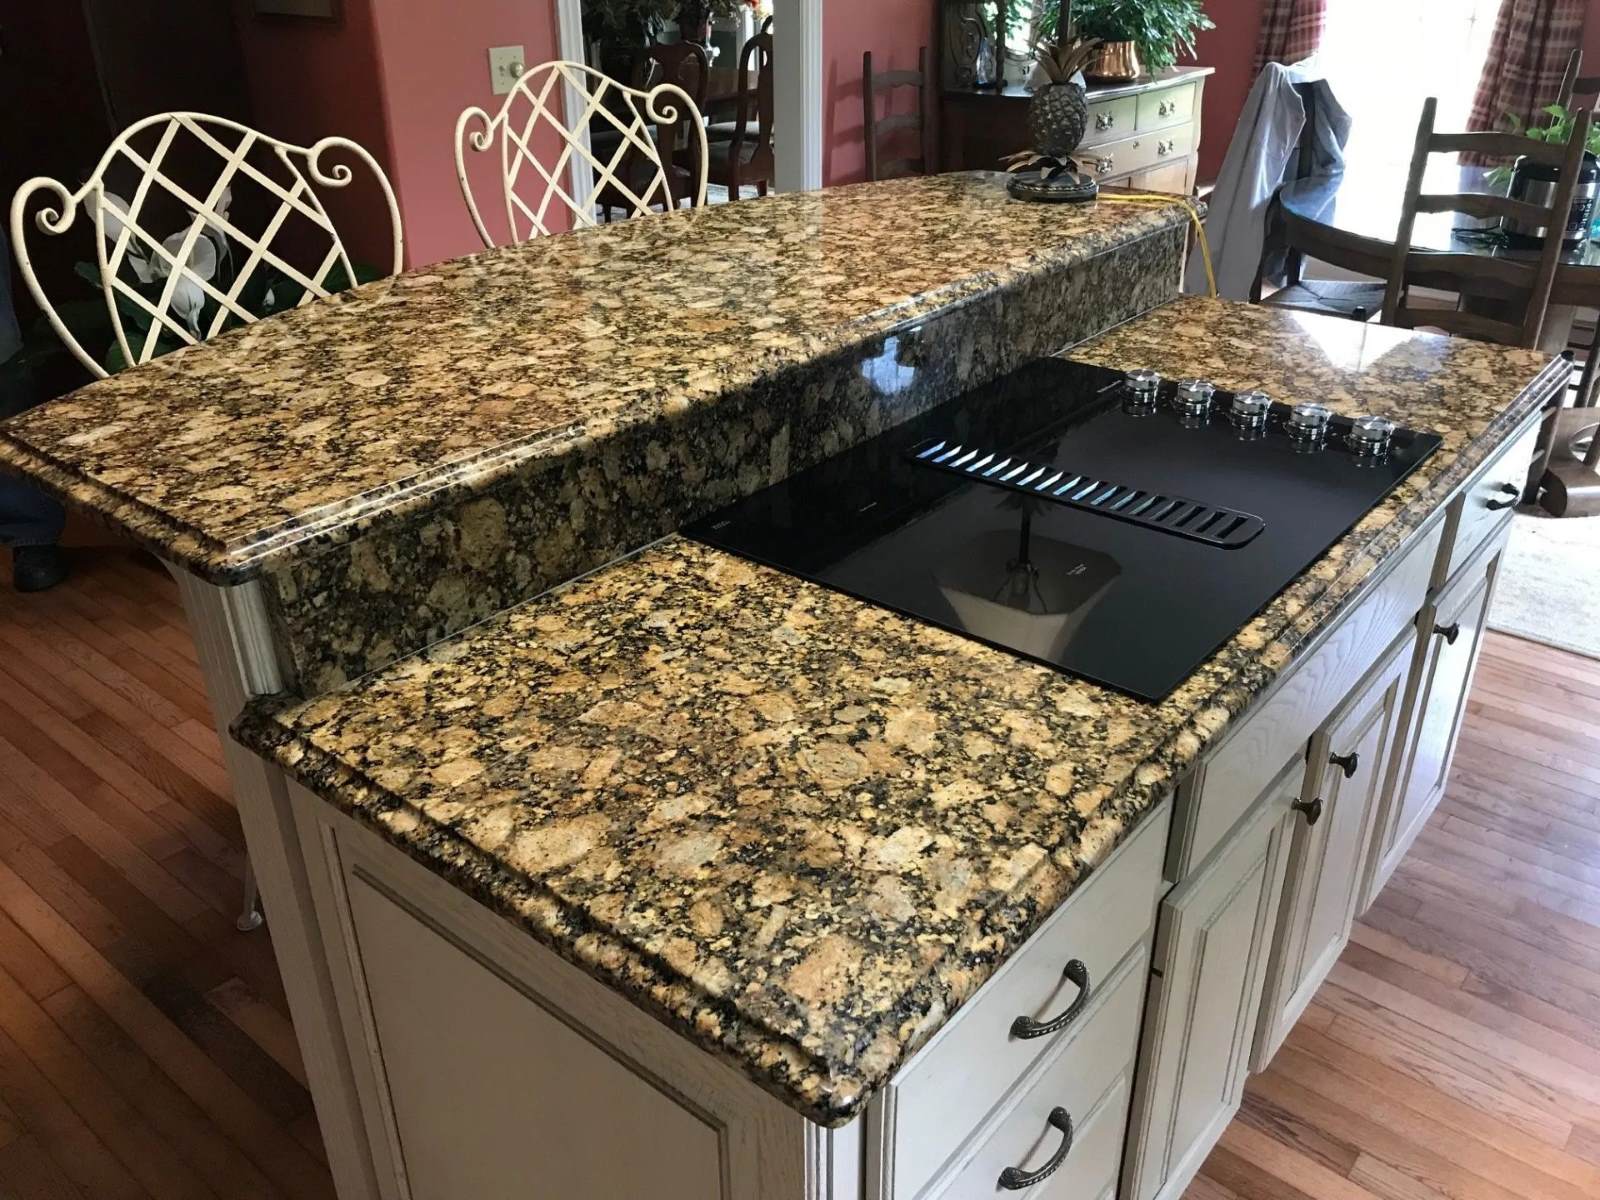 What Not To Use On Granite Countertops